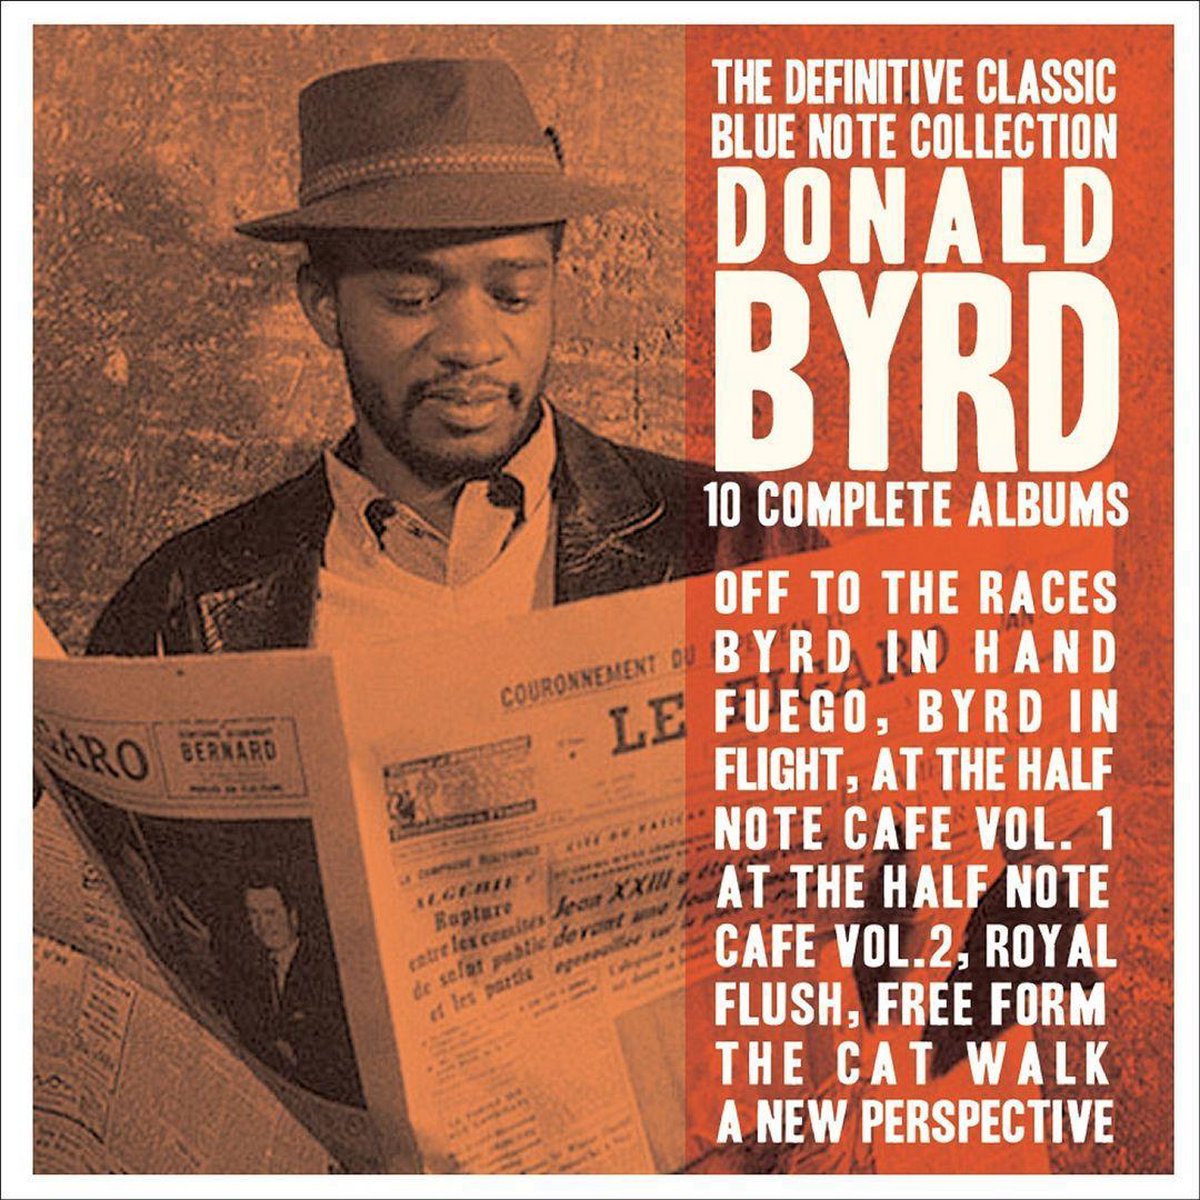 Definitive Classic Blue Note Collection - Donald Byrd